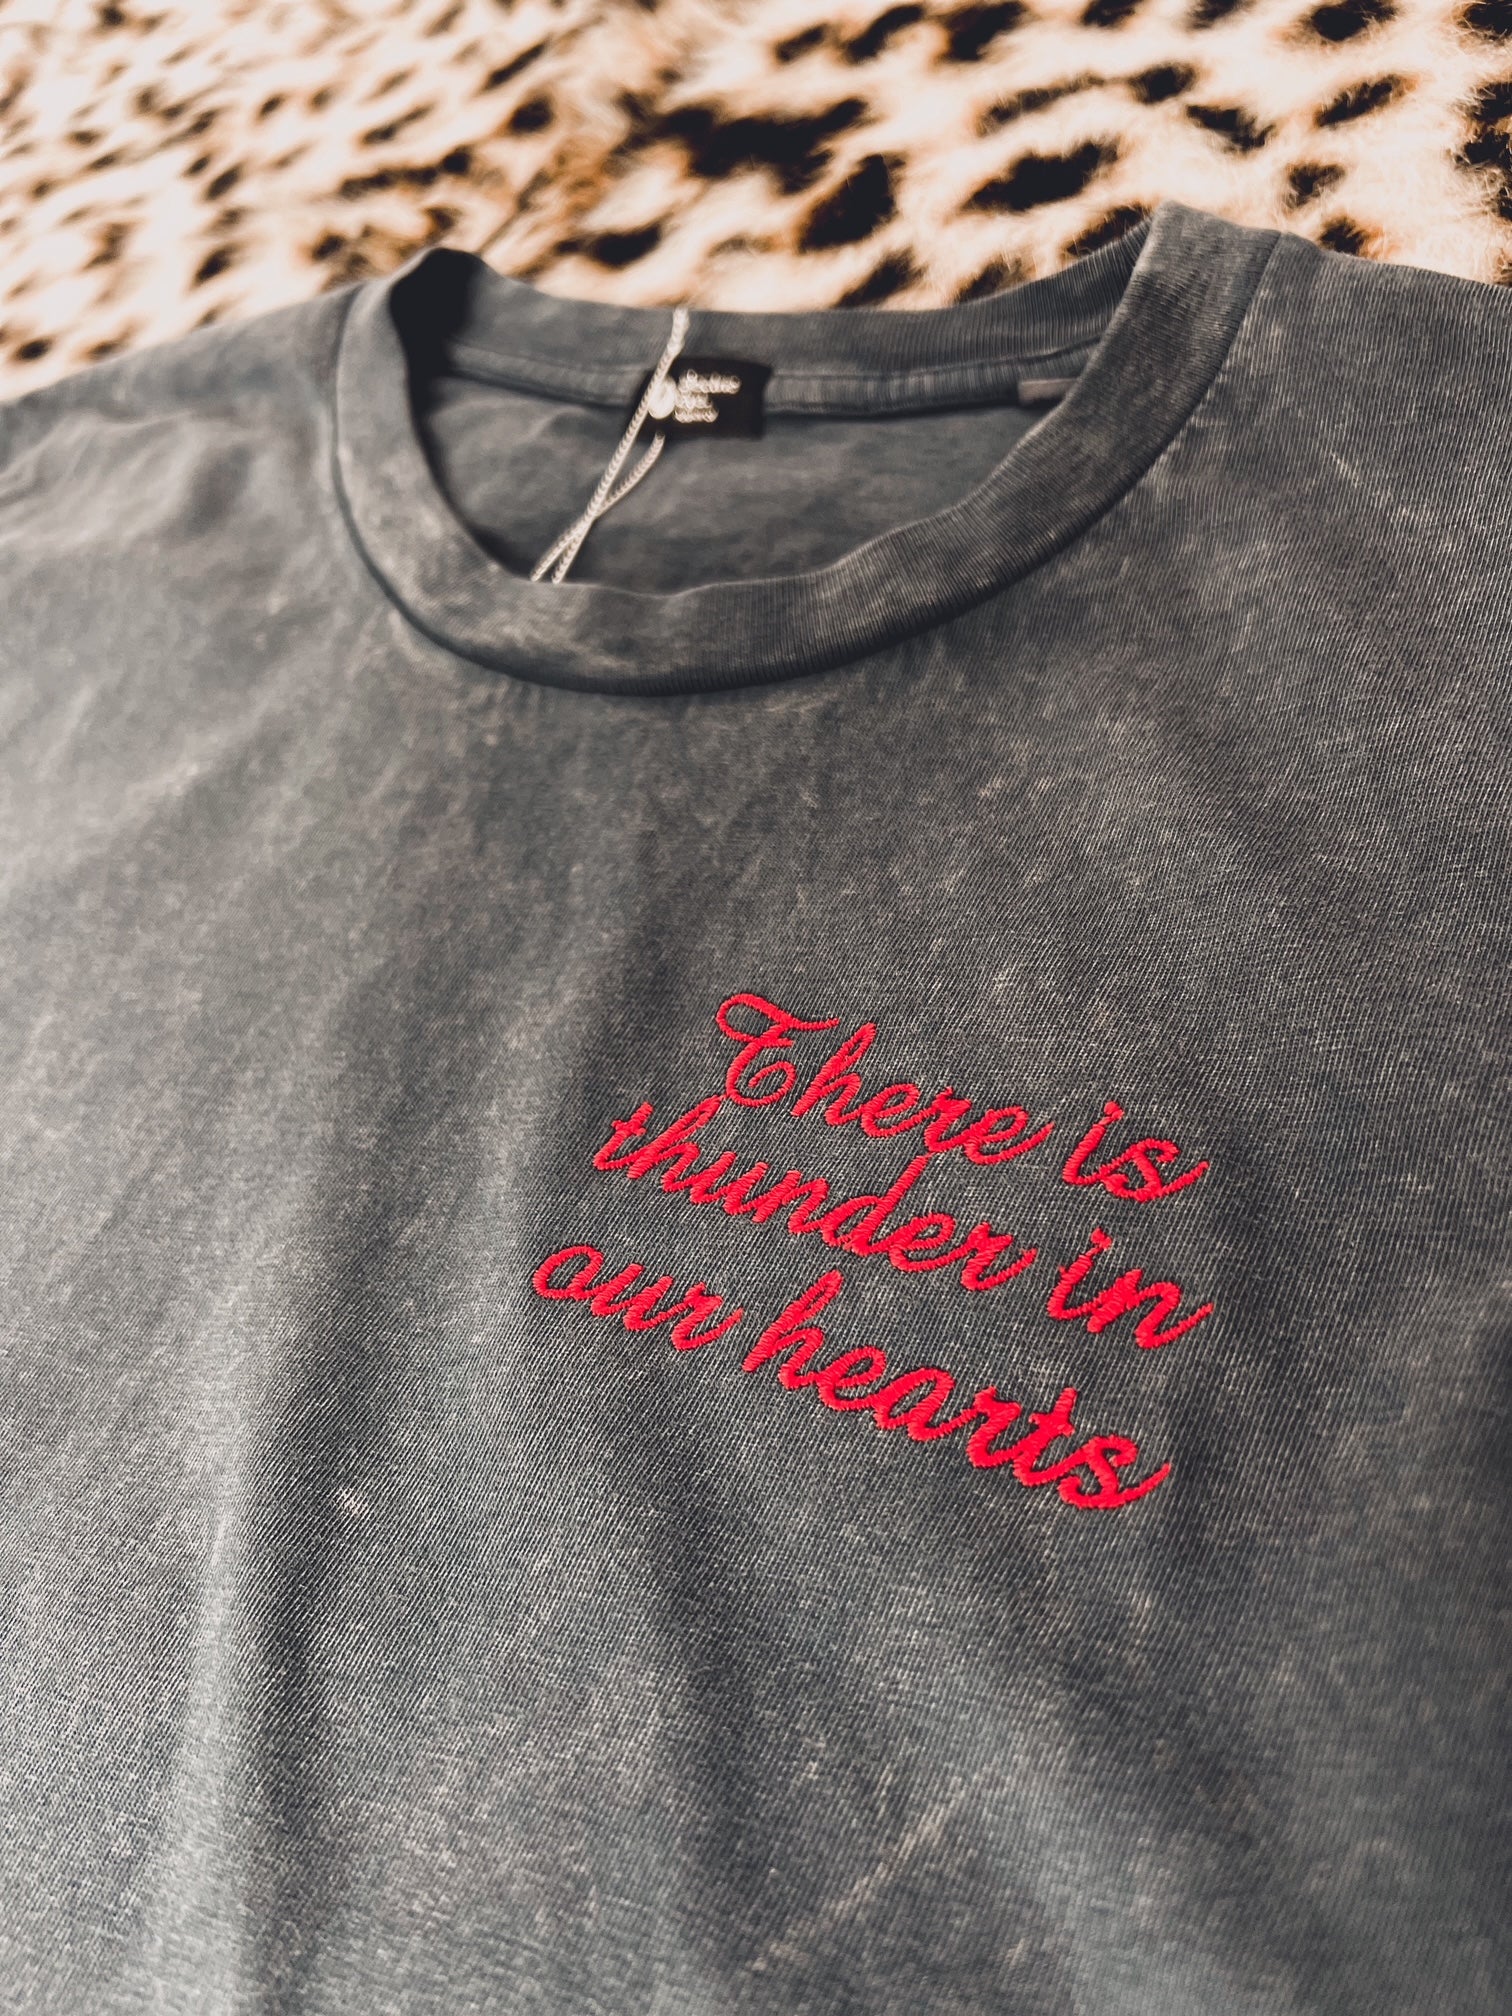 'THERE IS THUNDER IN OUR HEARTS' EMBROIDERED UNISEX GARMENT DYED ORGANIC COTTON 'CREATOR VINTAGE' T-SHIRT